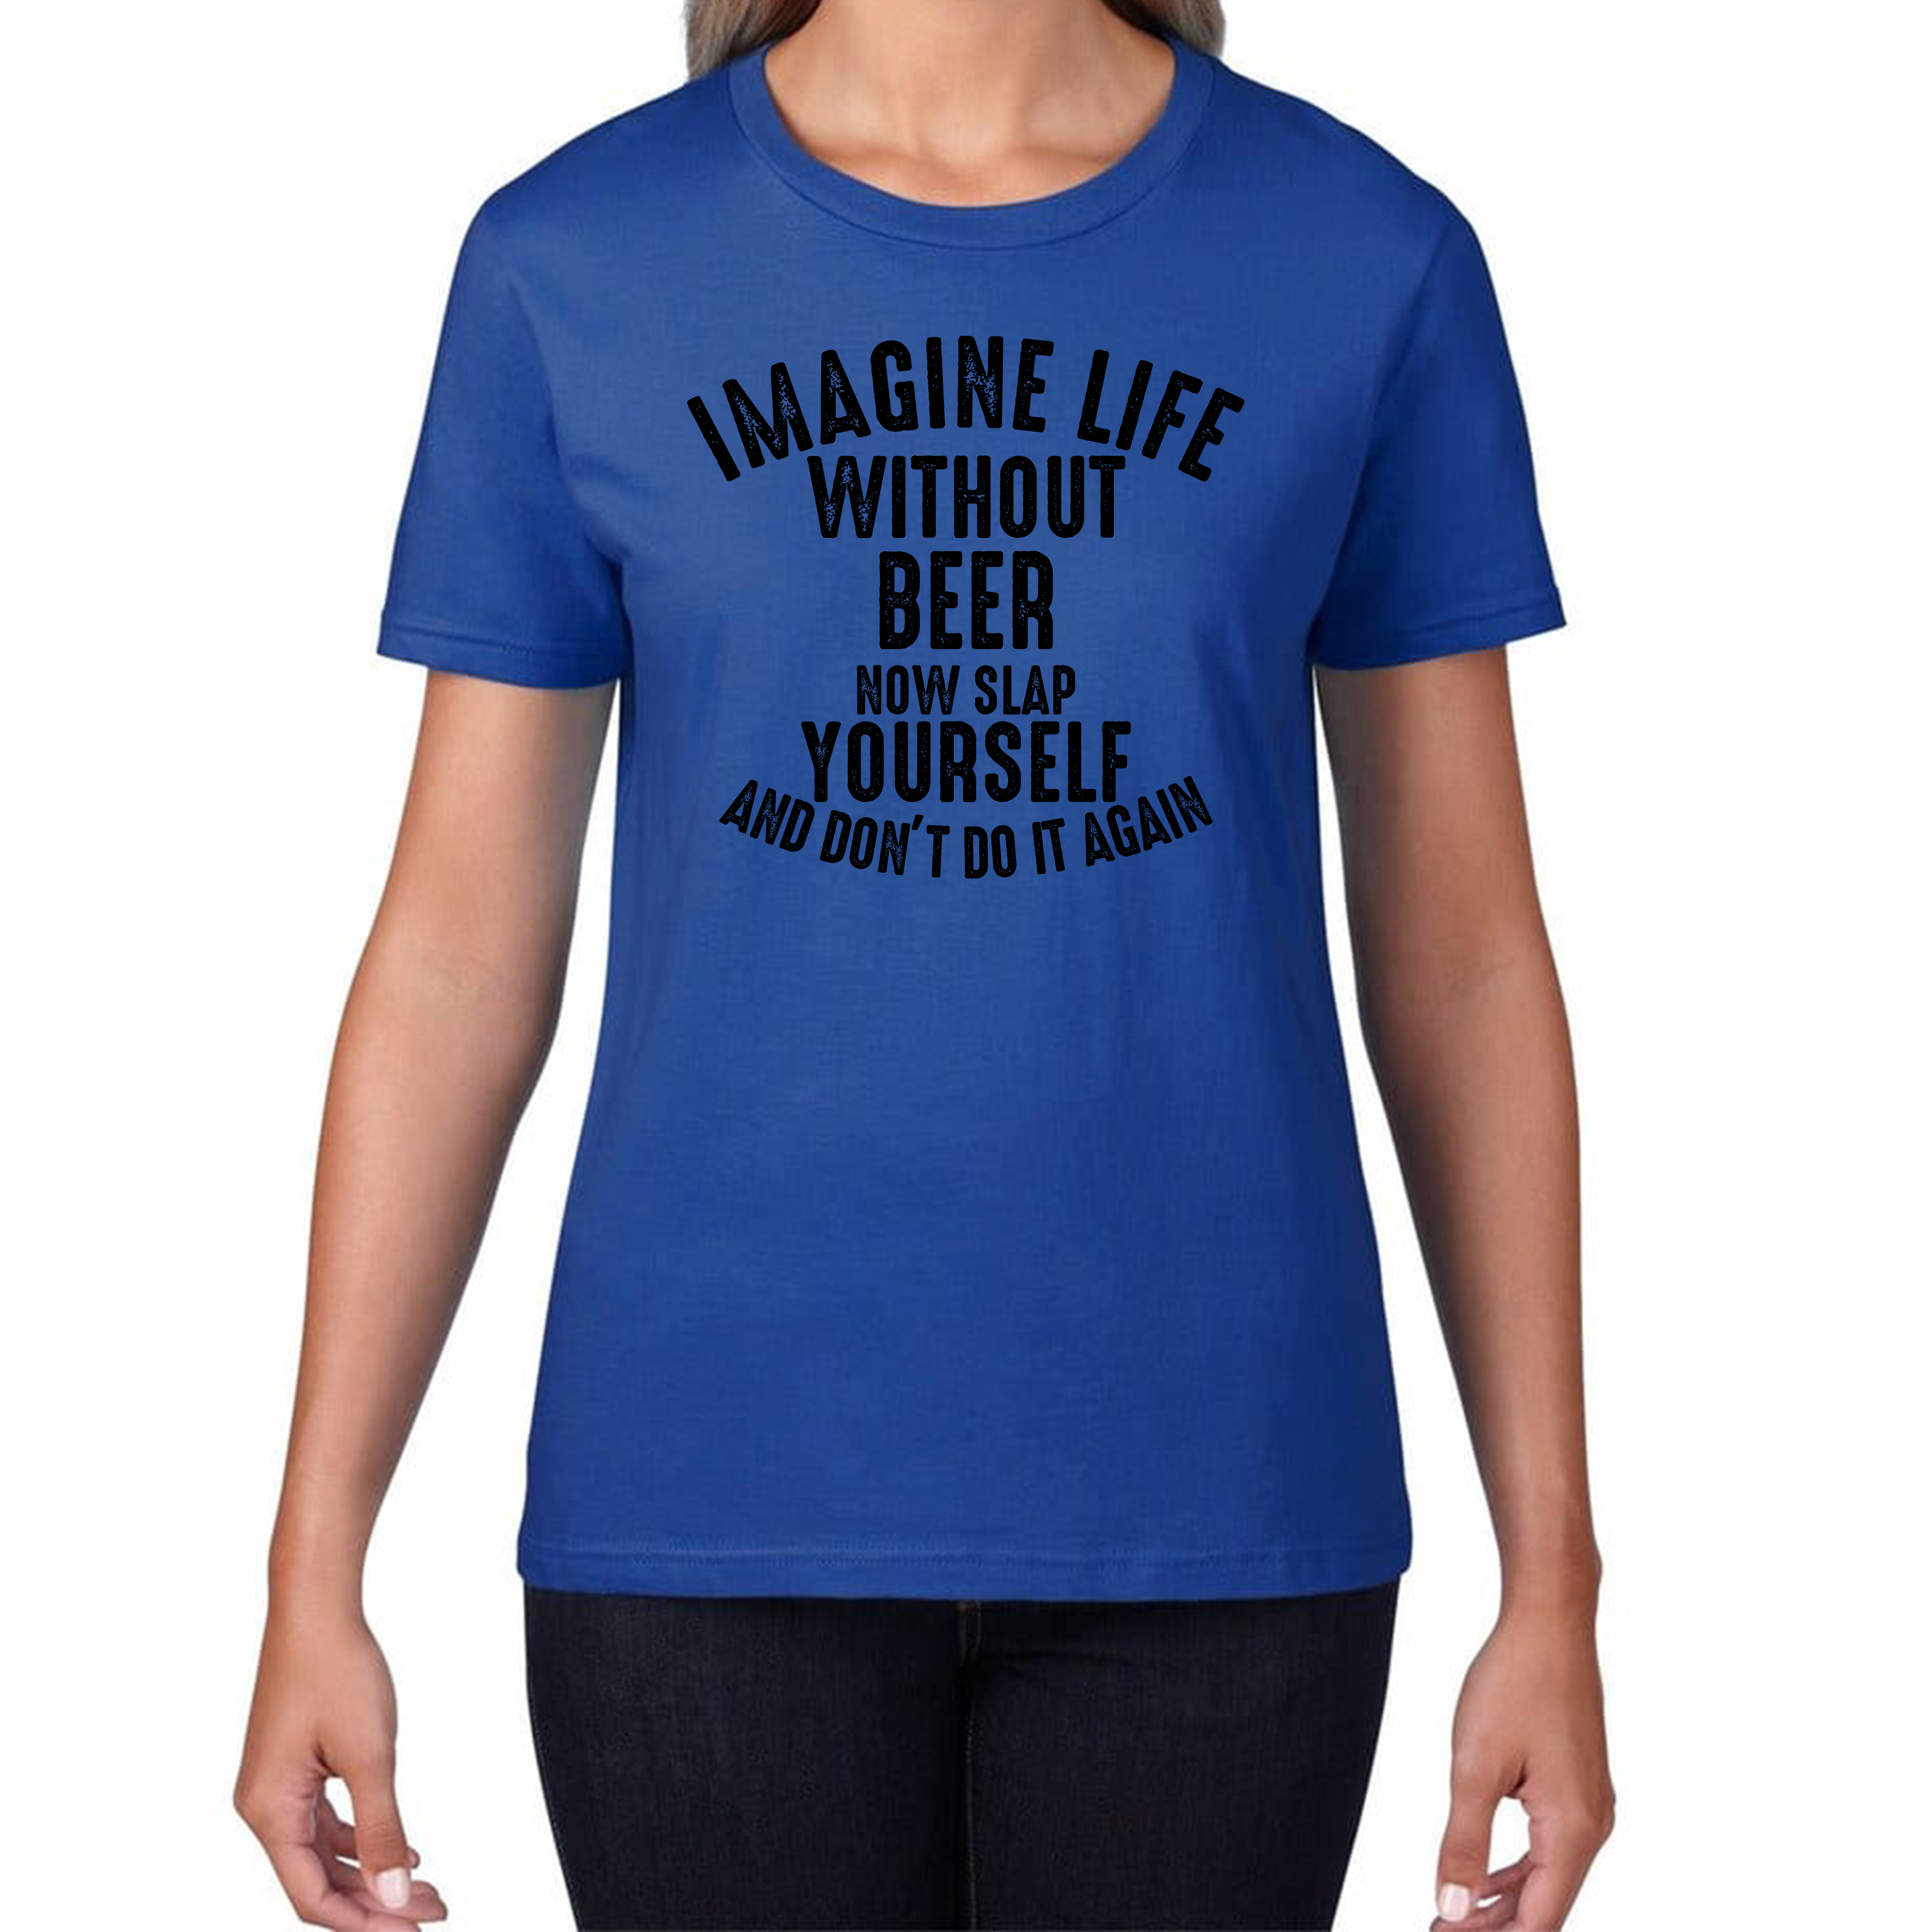 Imagine Life Without Beer Now Slap Yourself And Don' Do It Again T-Shirt Drink Lovers Beer Drinking Womens Tee Top